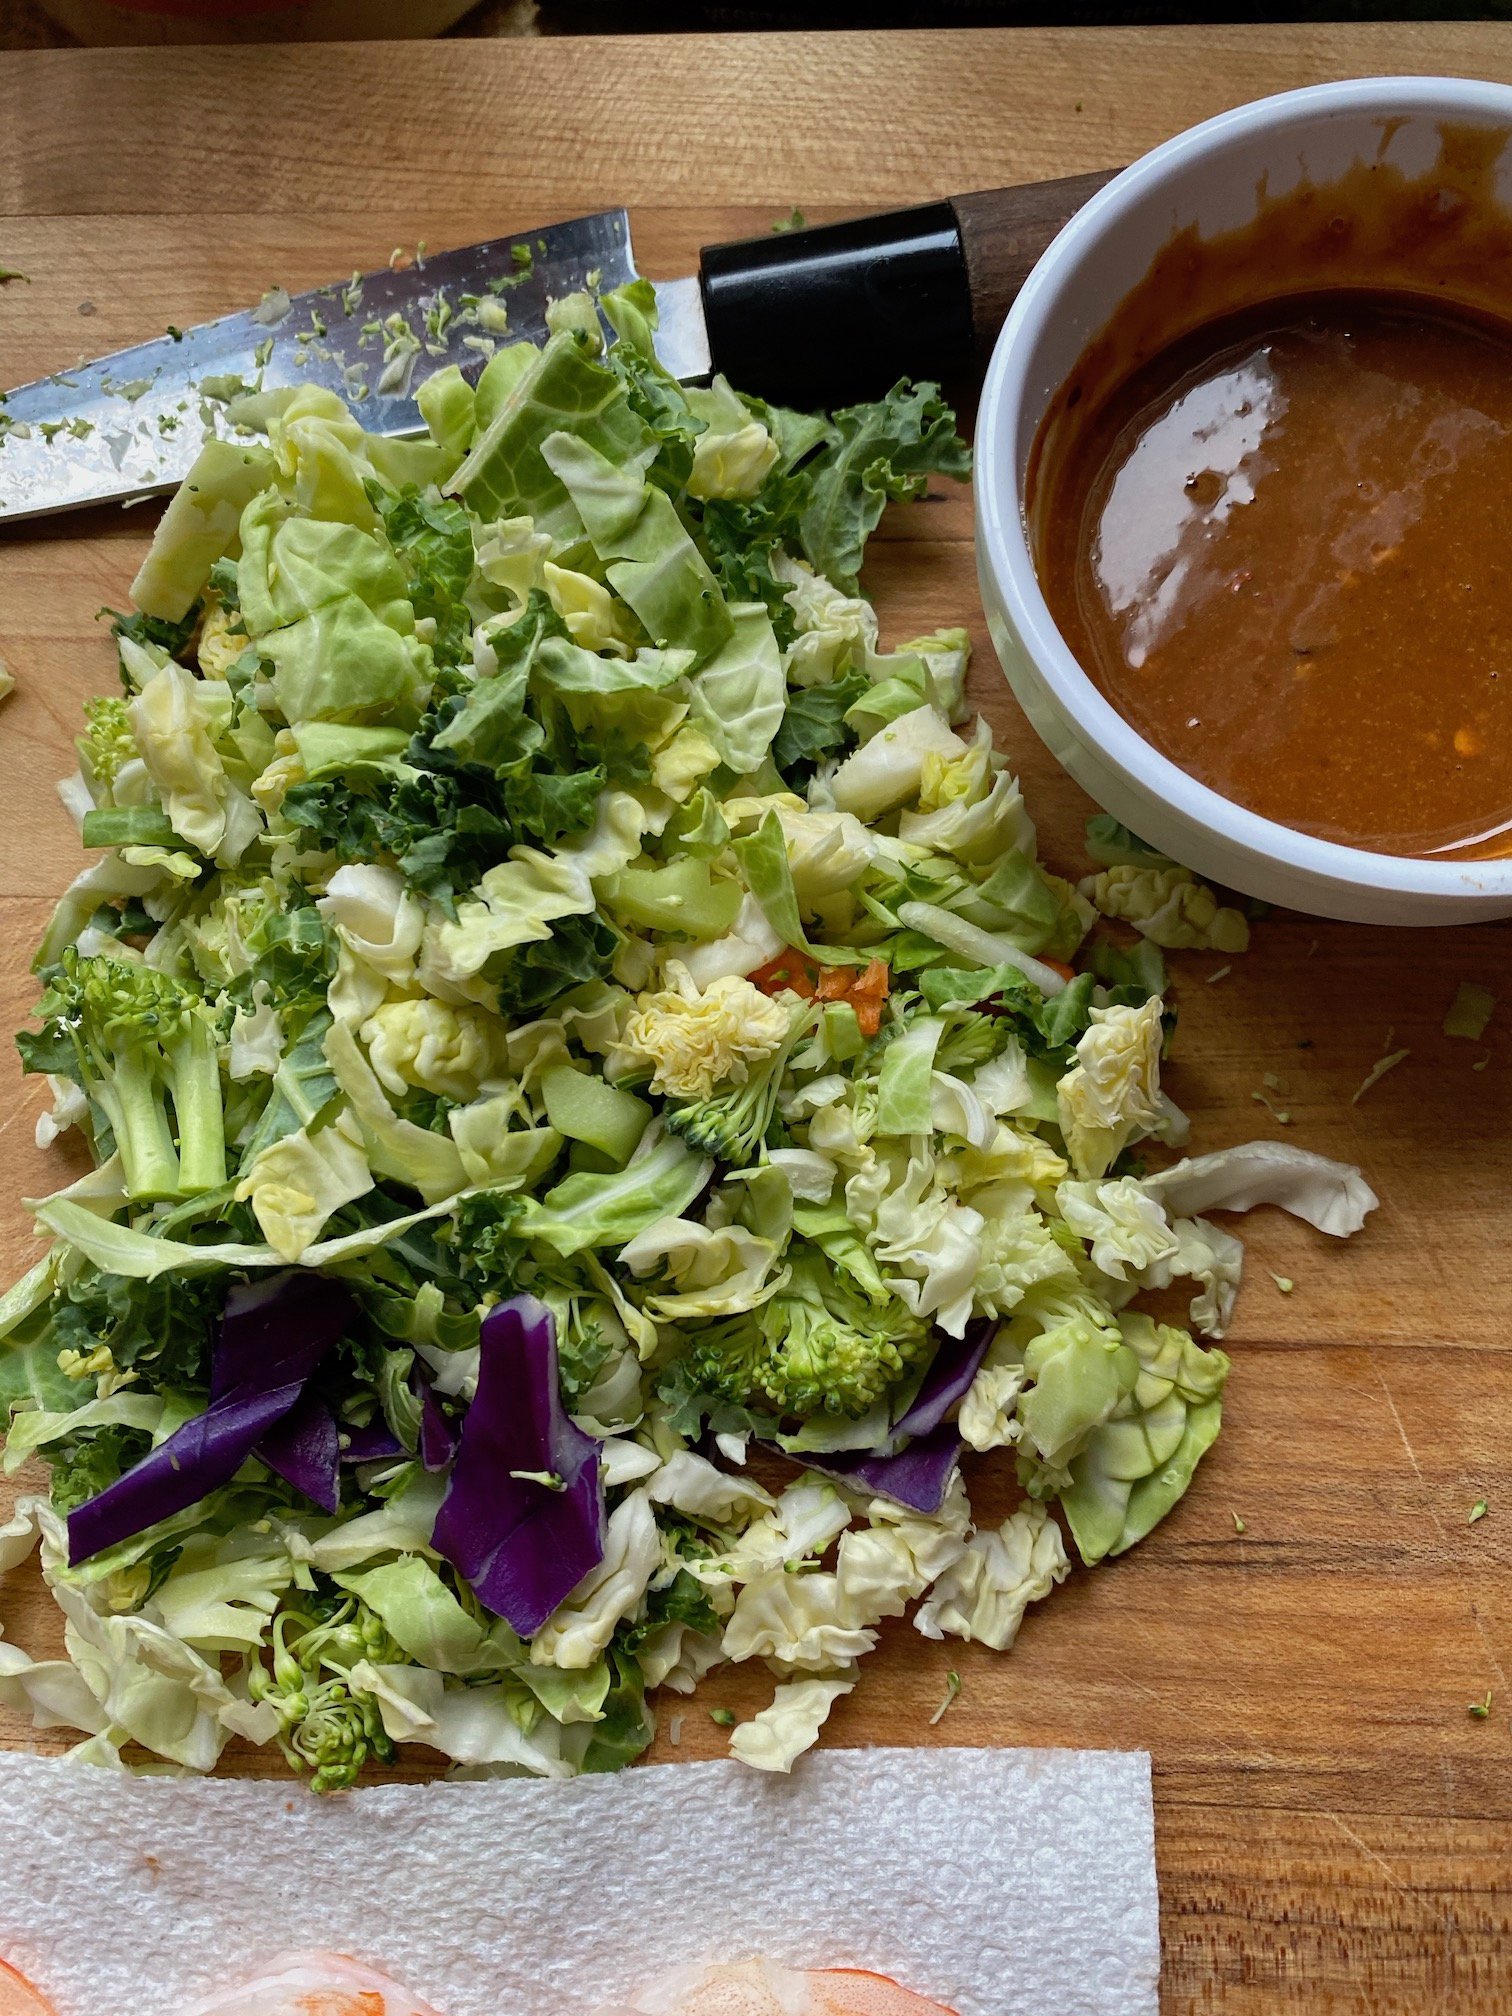 this is a cutting board with chopped bagged salad and peanut sauce for spring roll wrappers